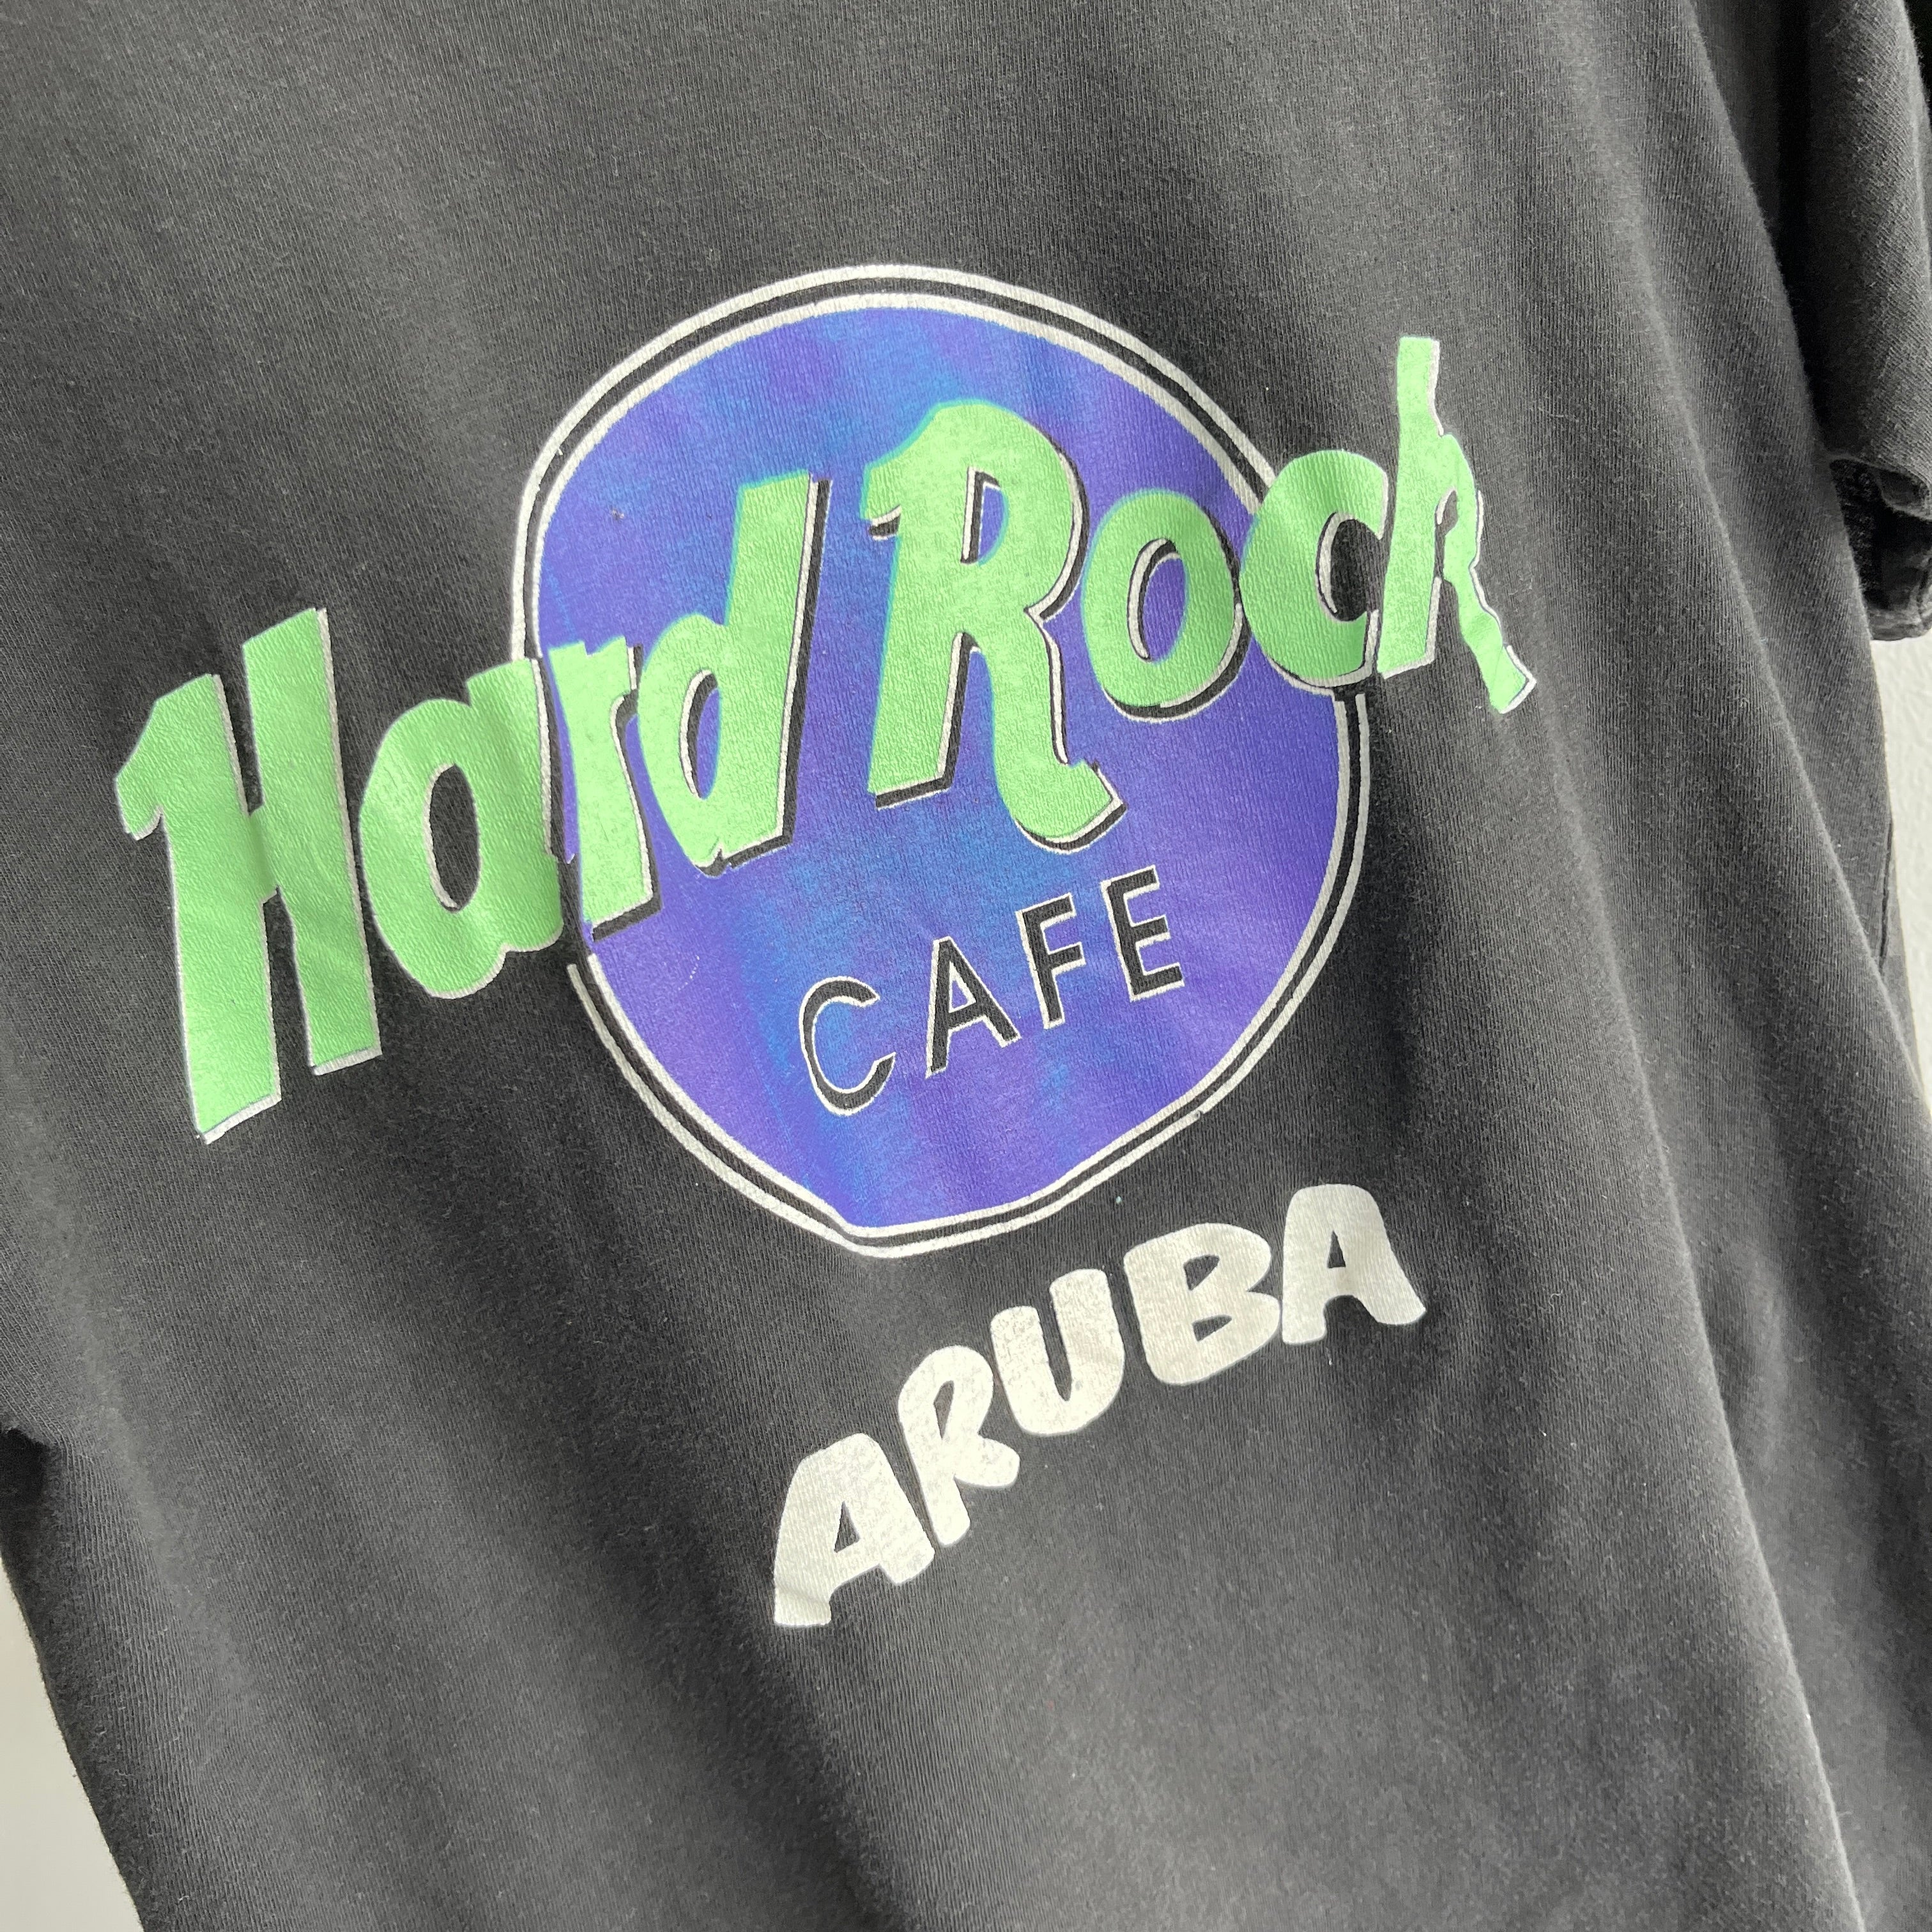 1980s Hard Rock Cafe Aruba - Check Out The Red Lantern Tag!